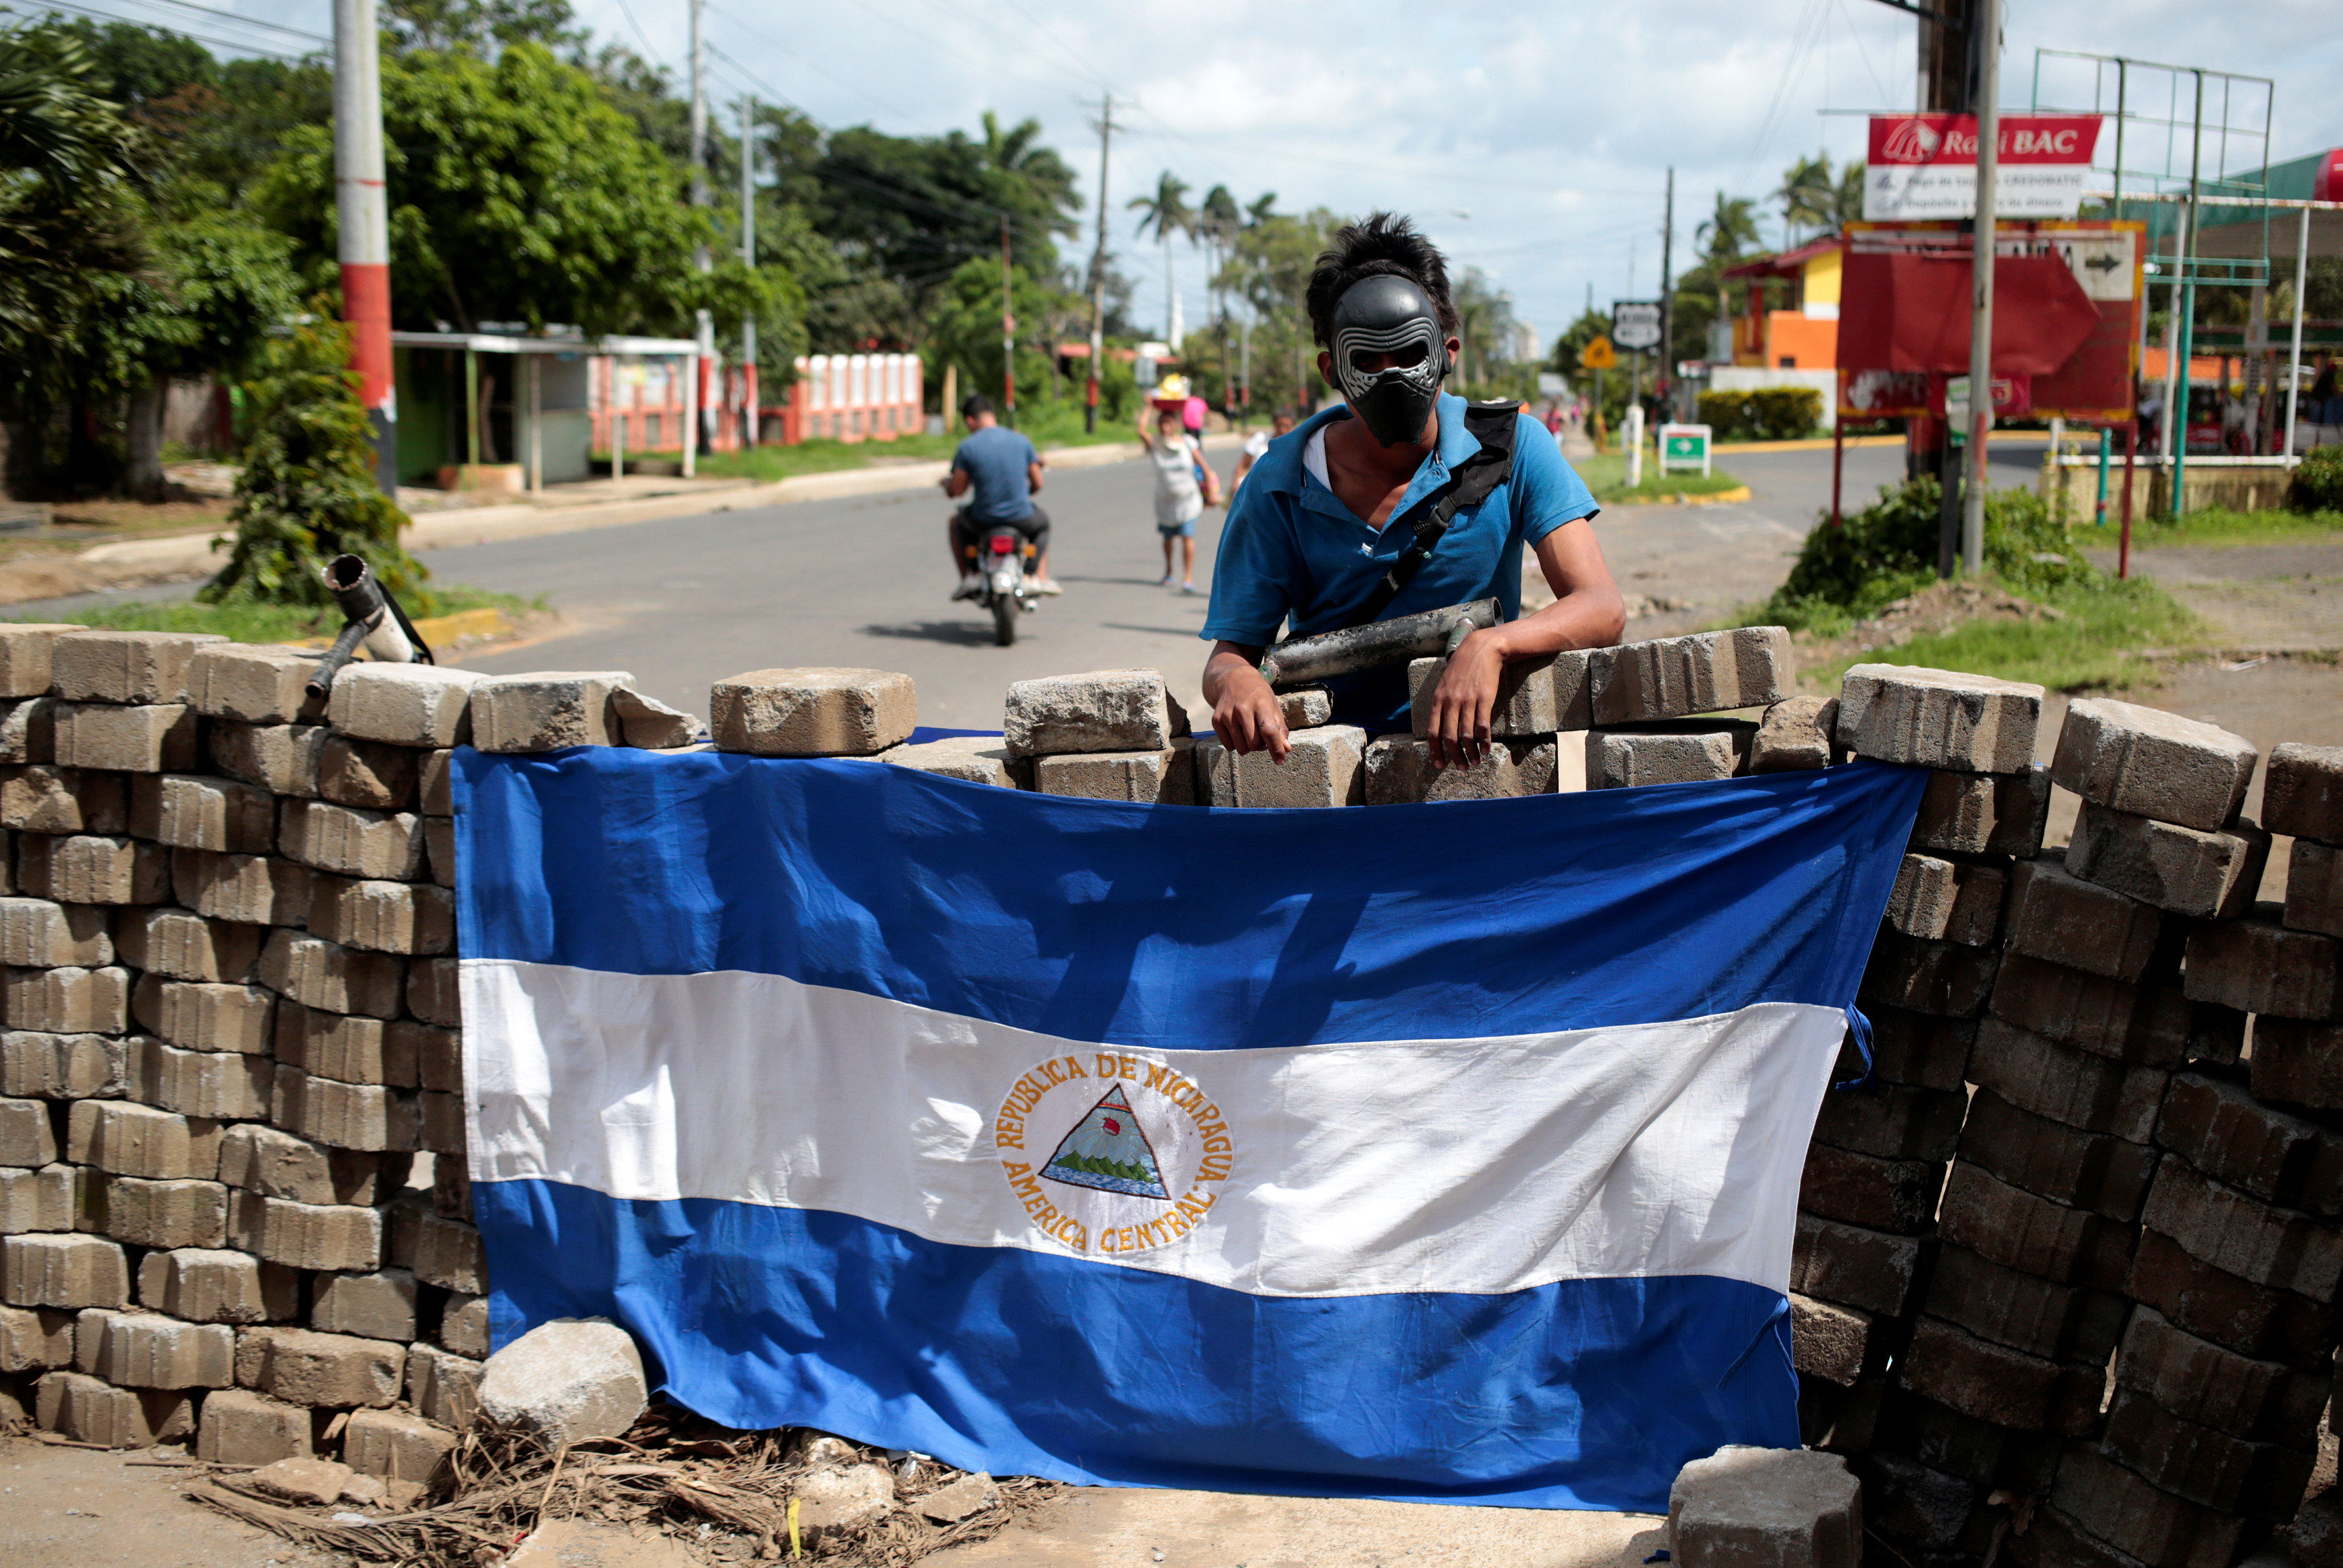 U.S. orders nonemergency government personnel to leave Nicaragua CBS